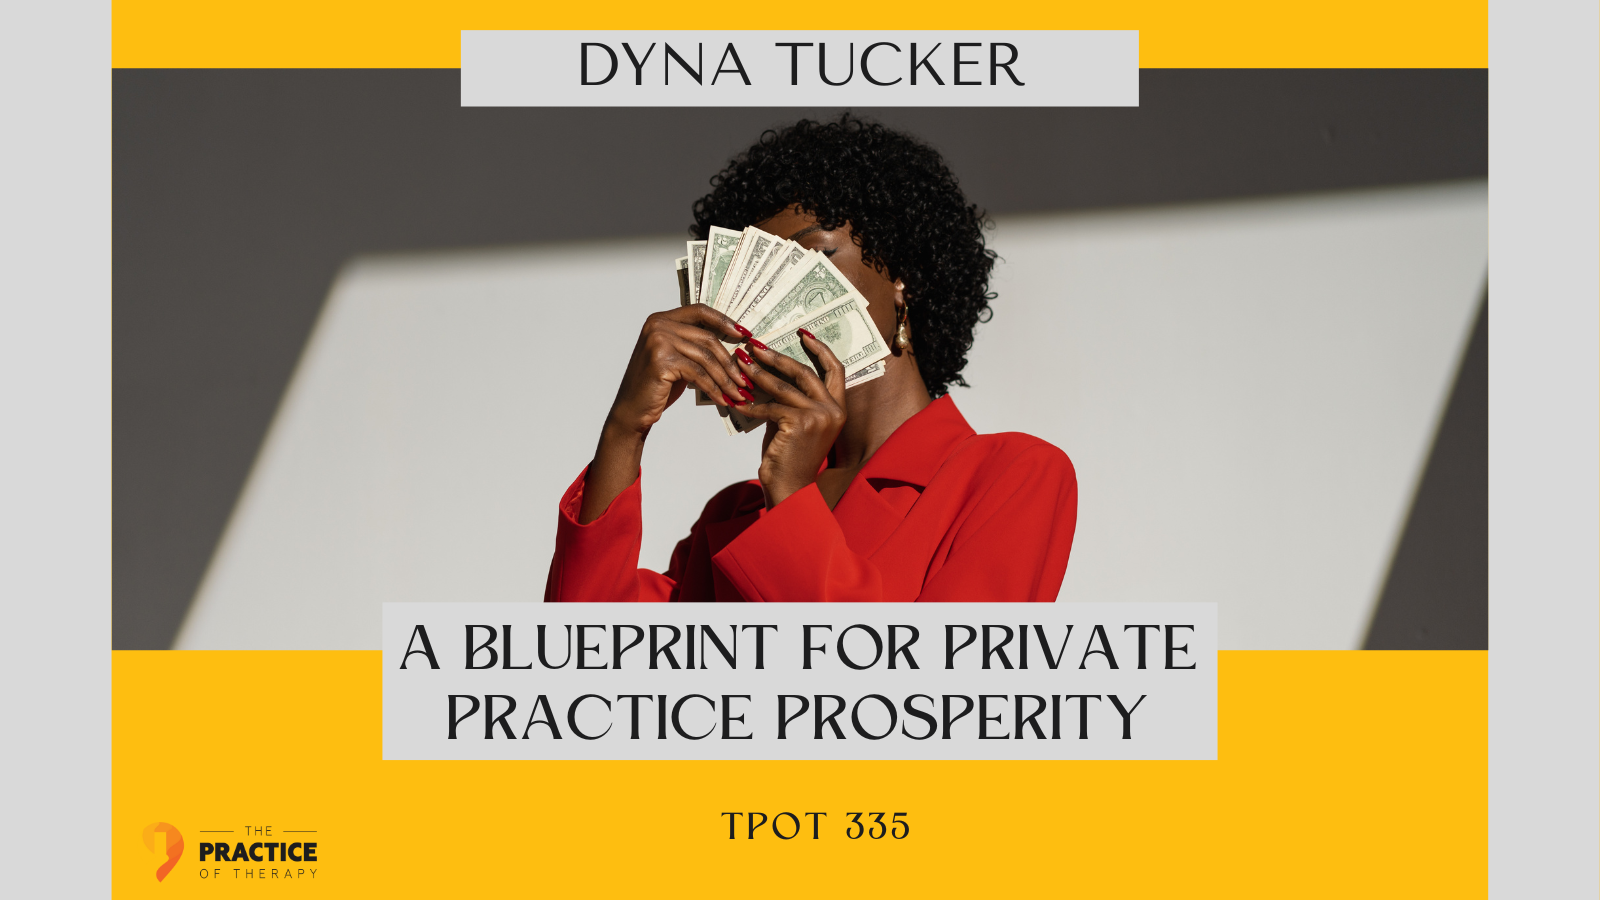 Dyna Tucker A Blueprint for Private Practice Prosperity TPOT 335